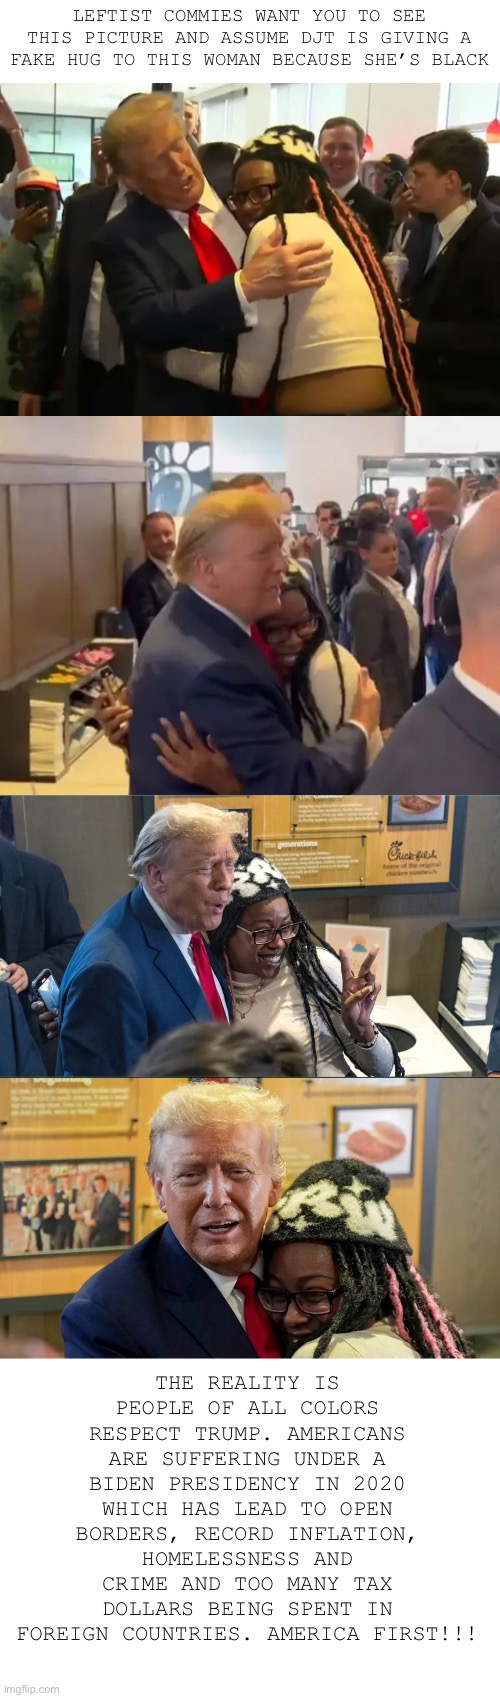 American Commies live in a delusional world | LEFTIST COMMIES WANT YOU TO SEE THIS PICTURE AND ASSUME DJT IS GIVING A FAKE HUG TO THIS WOMAN BECAUSE SHE’S BLACK; THE REALITY IS PEOPLE OF ALL COLORS RESPECT TRUMP. AMERICANS ARE SUFFERING UNDER A BIDEN PRESIDENCY IN 2020 WHICH HAS LEAD TO OPEN BORDERS, RECORD INFLATION, HOMELESSNESS AND CRIME AND TOO MANY TAX DOLLARS BEING SPENT IN FOREIGN COUNTRIES. AMERICA FIRST!!! | image tagged in bs,trump 2024,critical thinking | made w/ Imgflip meme maker